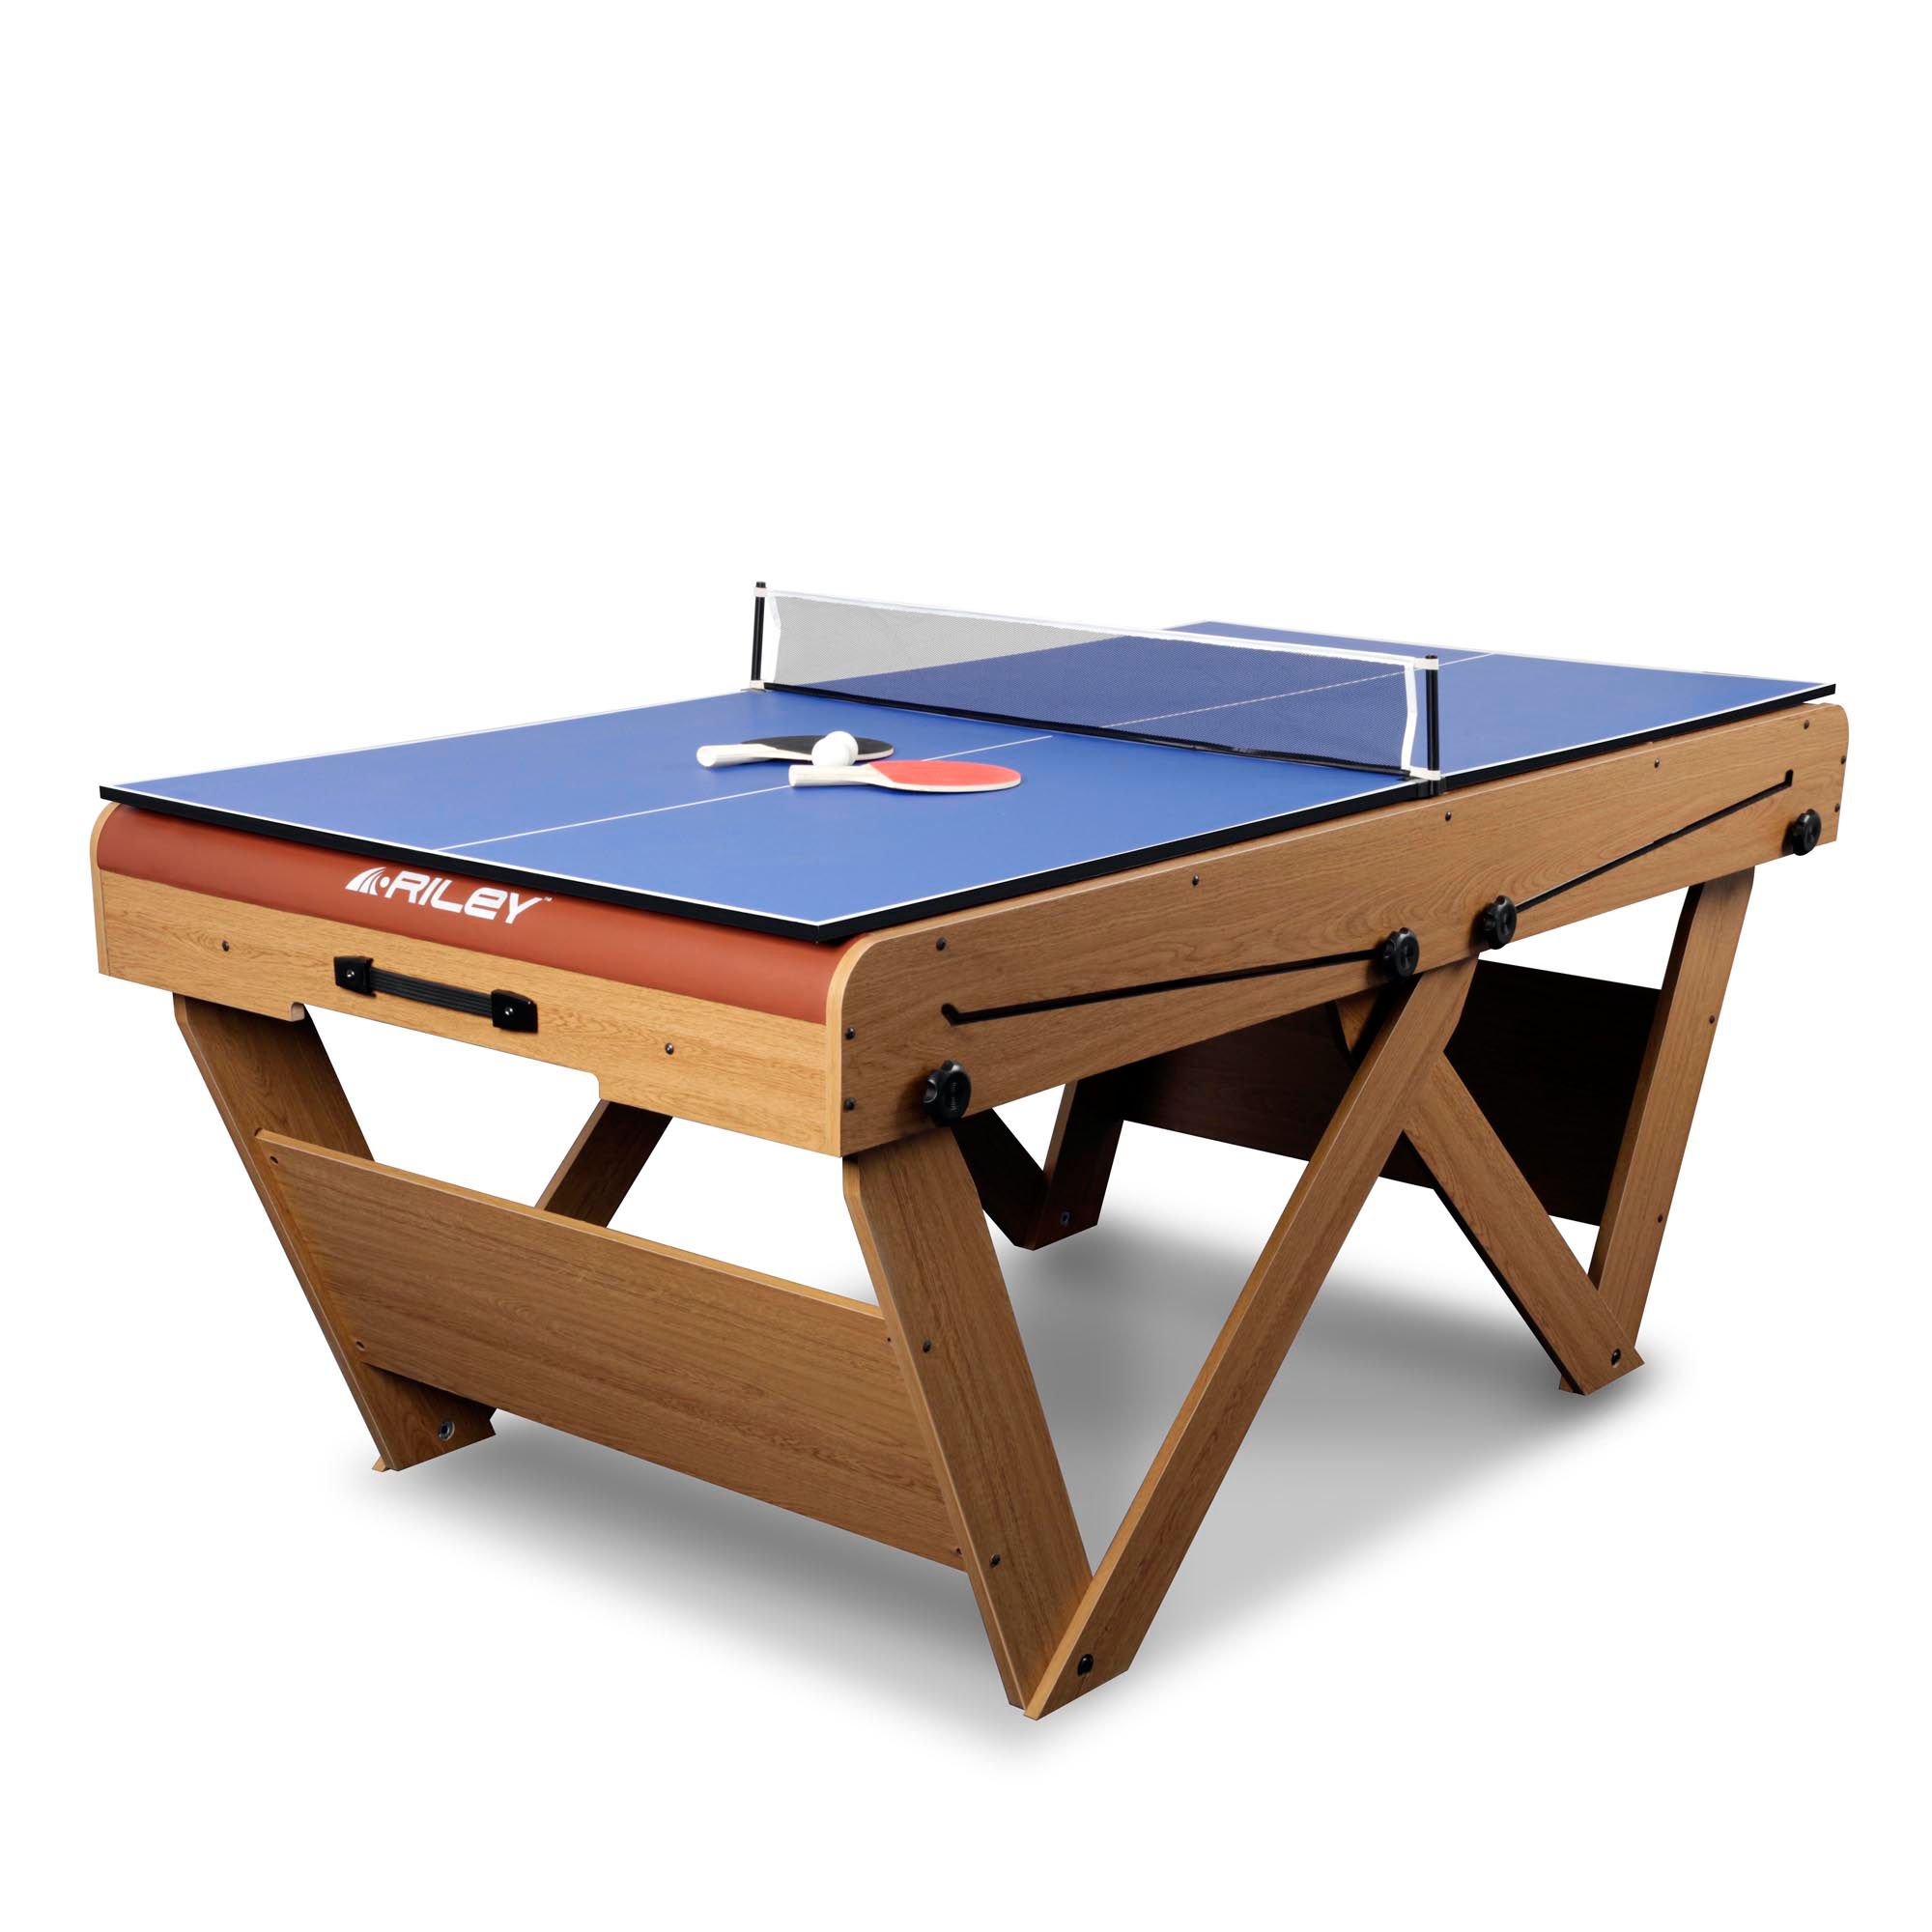 Riley 6ft Deluxe Pool and Table Tennis Table at John Lewis